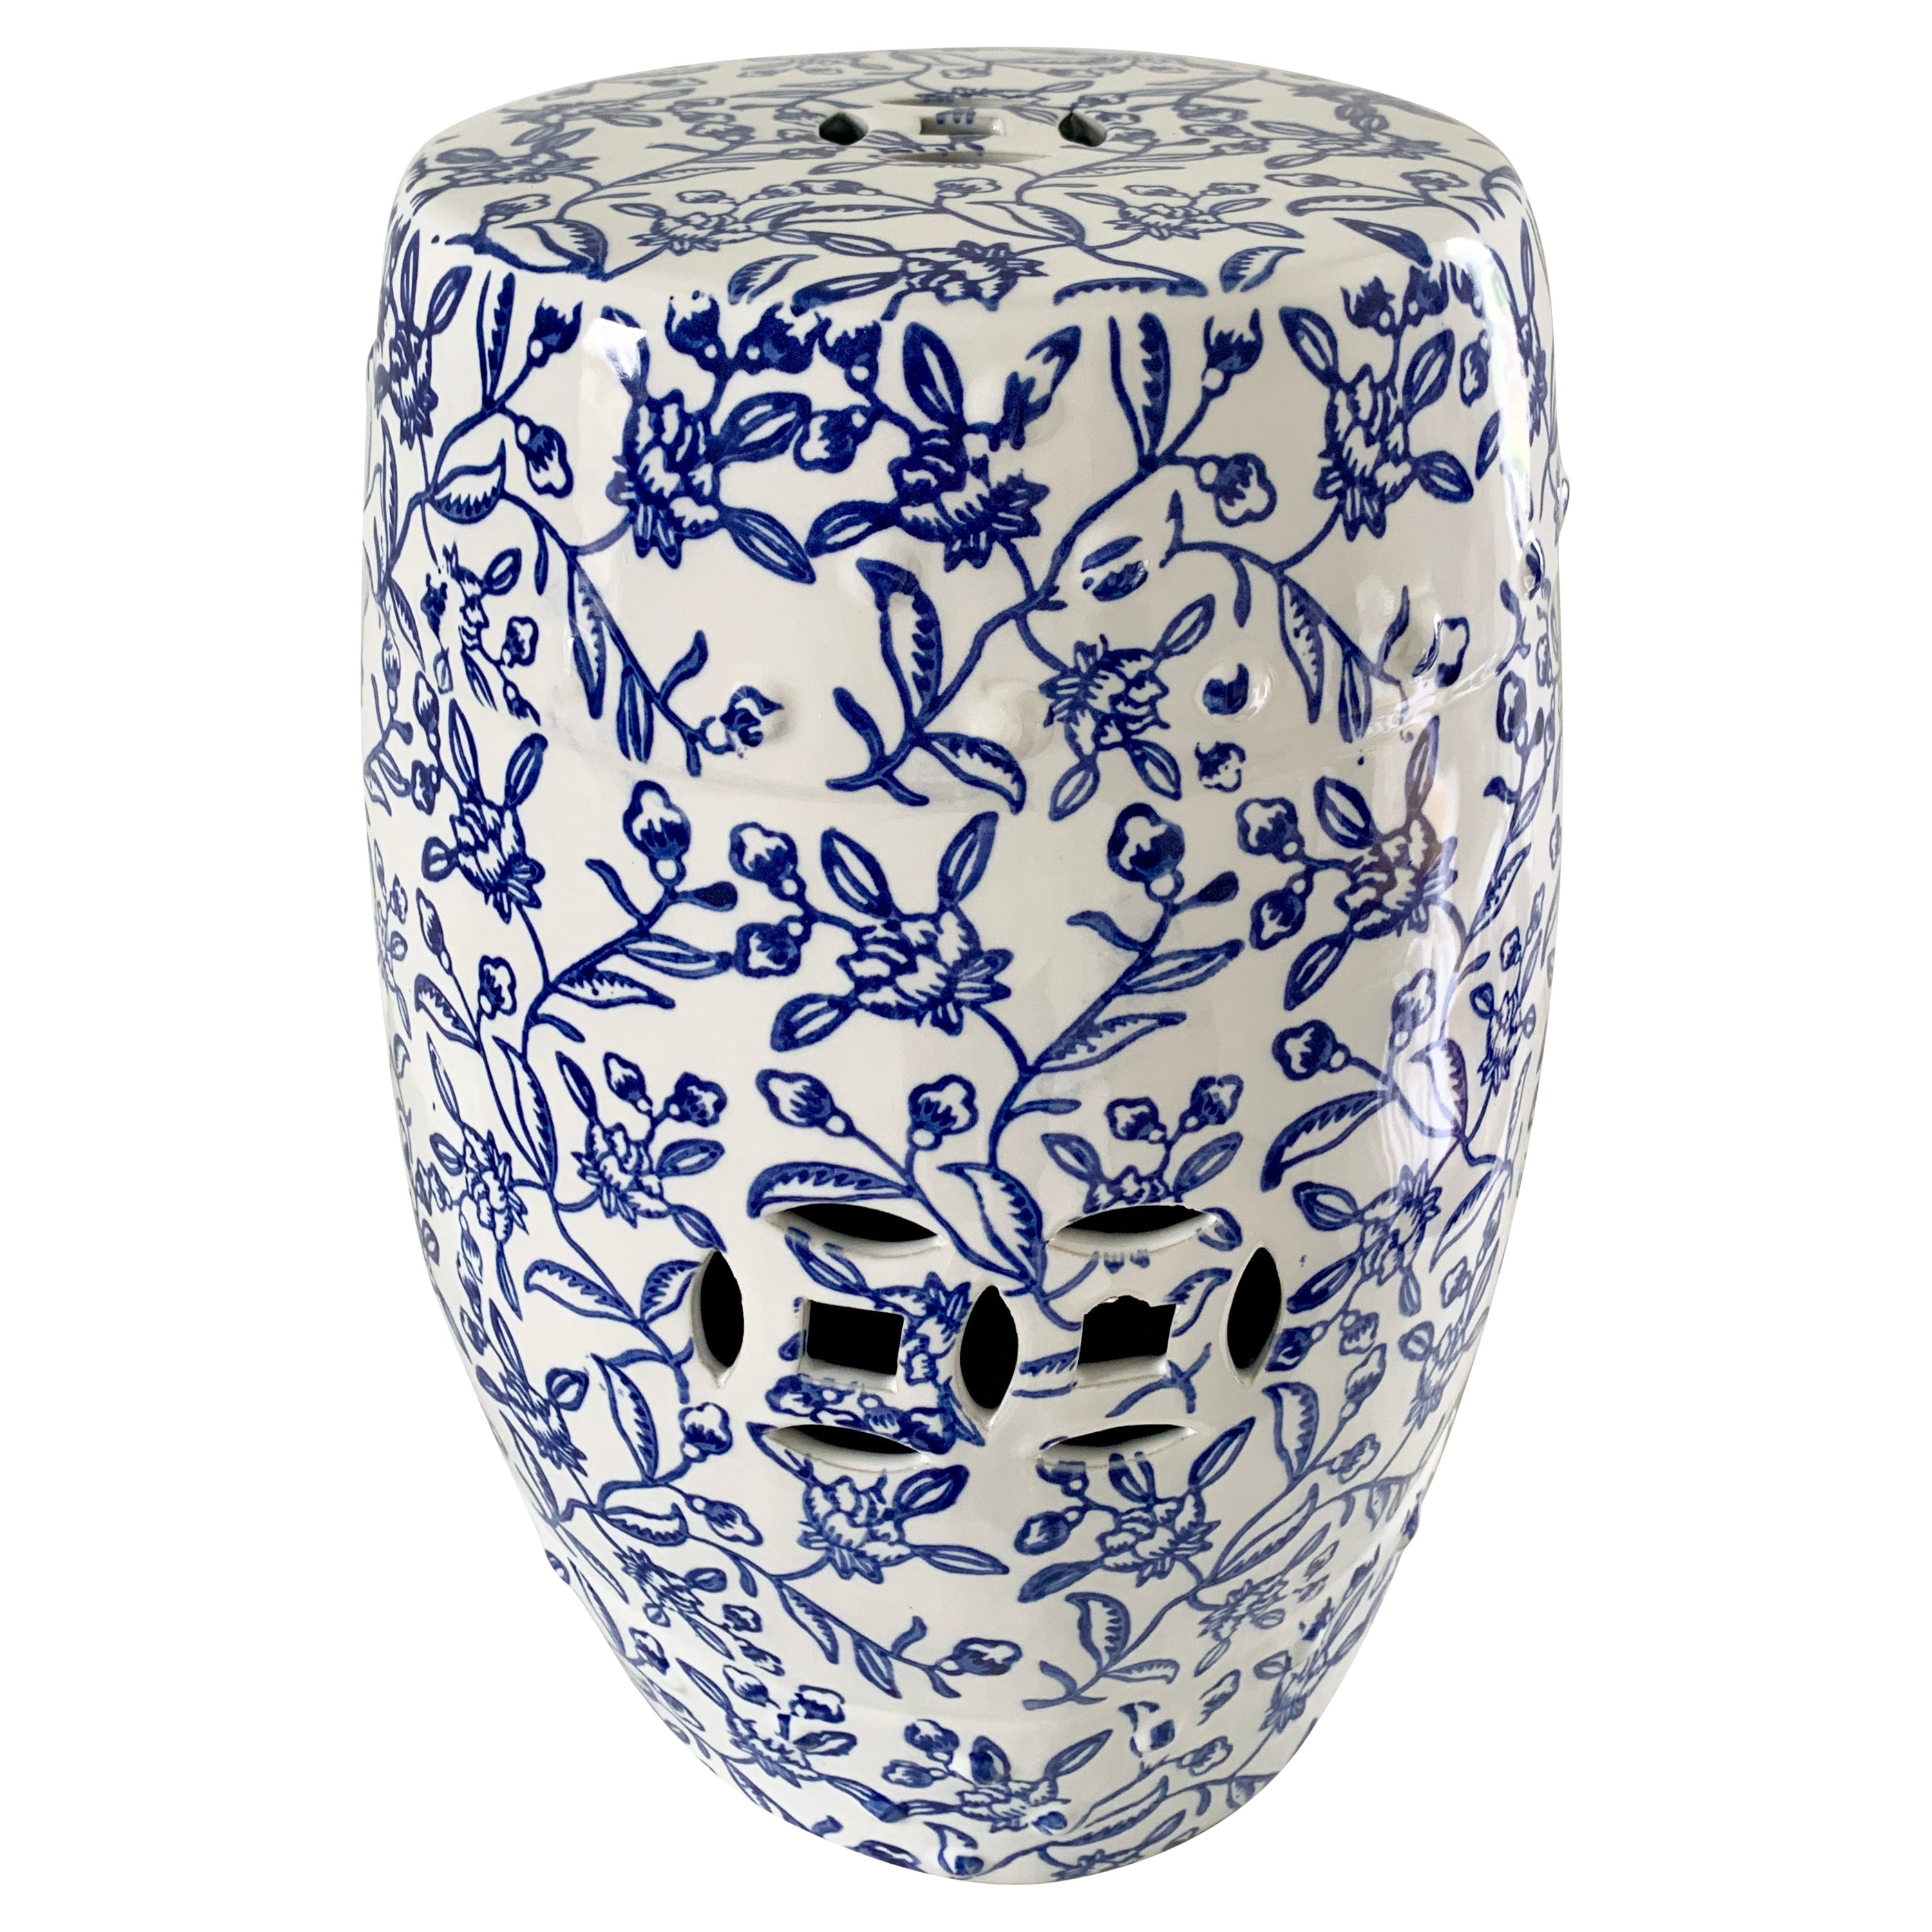 Chinoiserie Blue and White Floral Porcelain Garden Stool